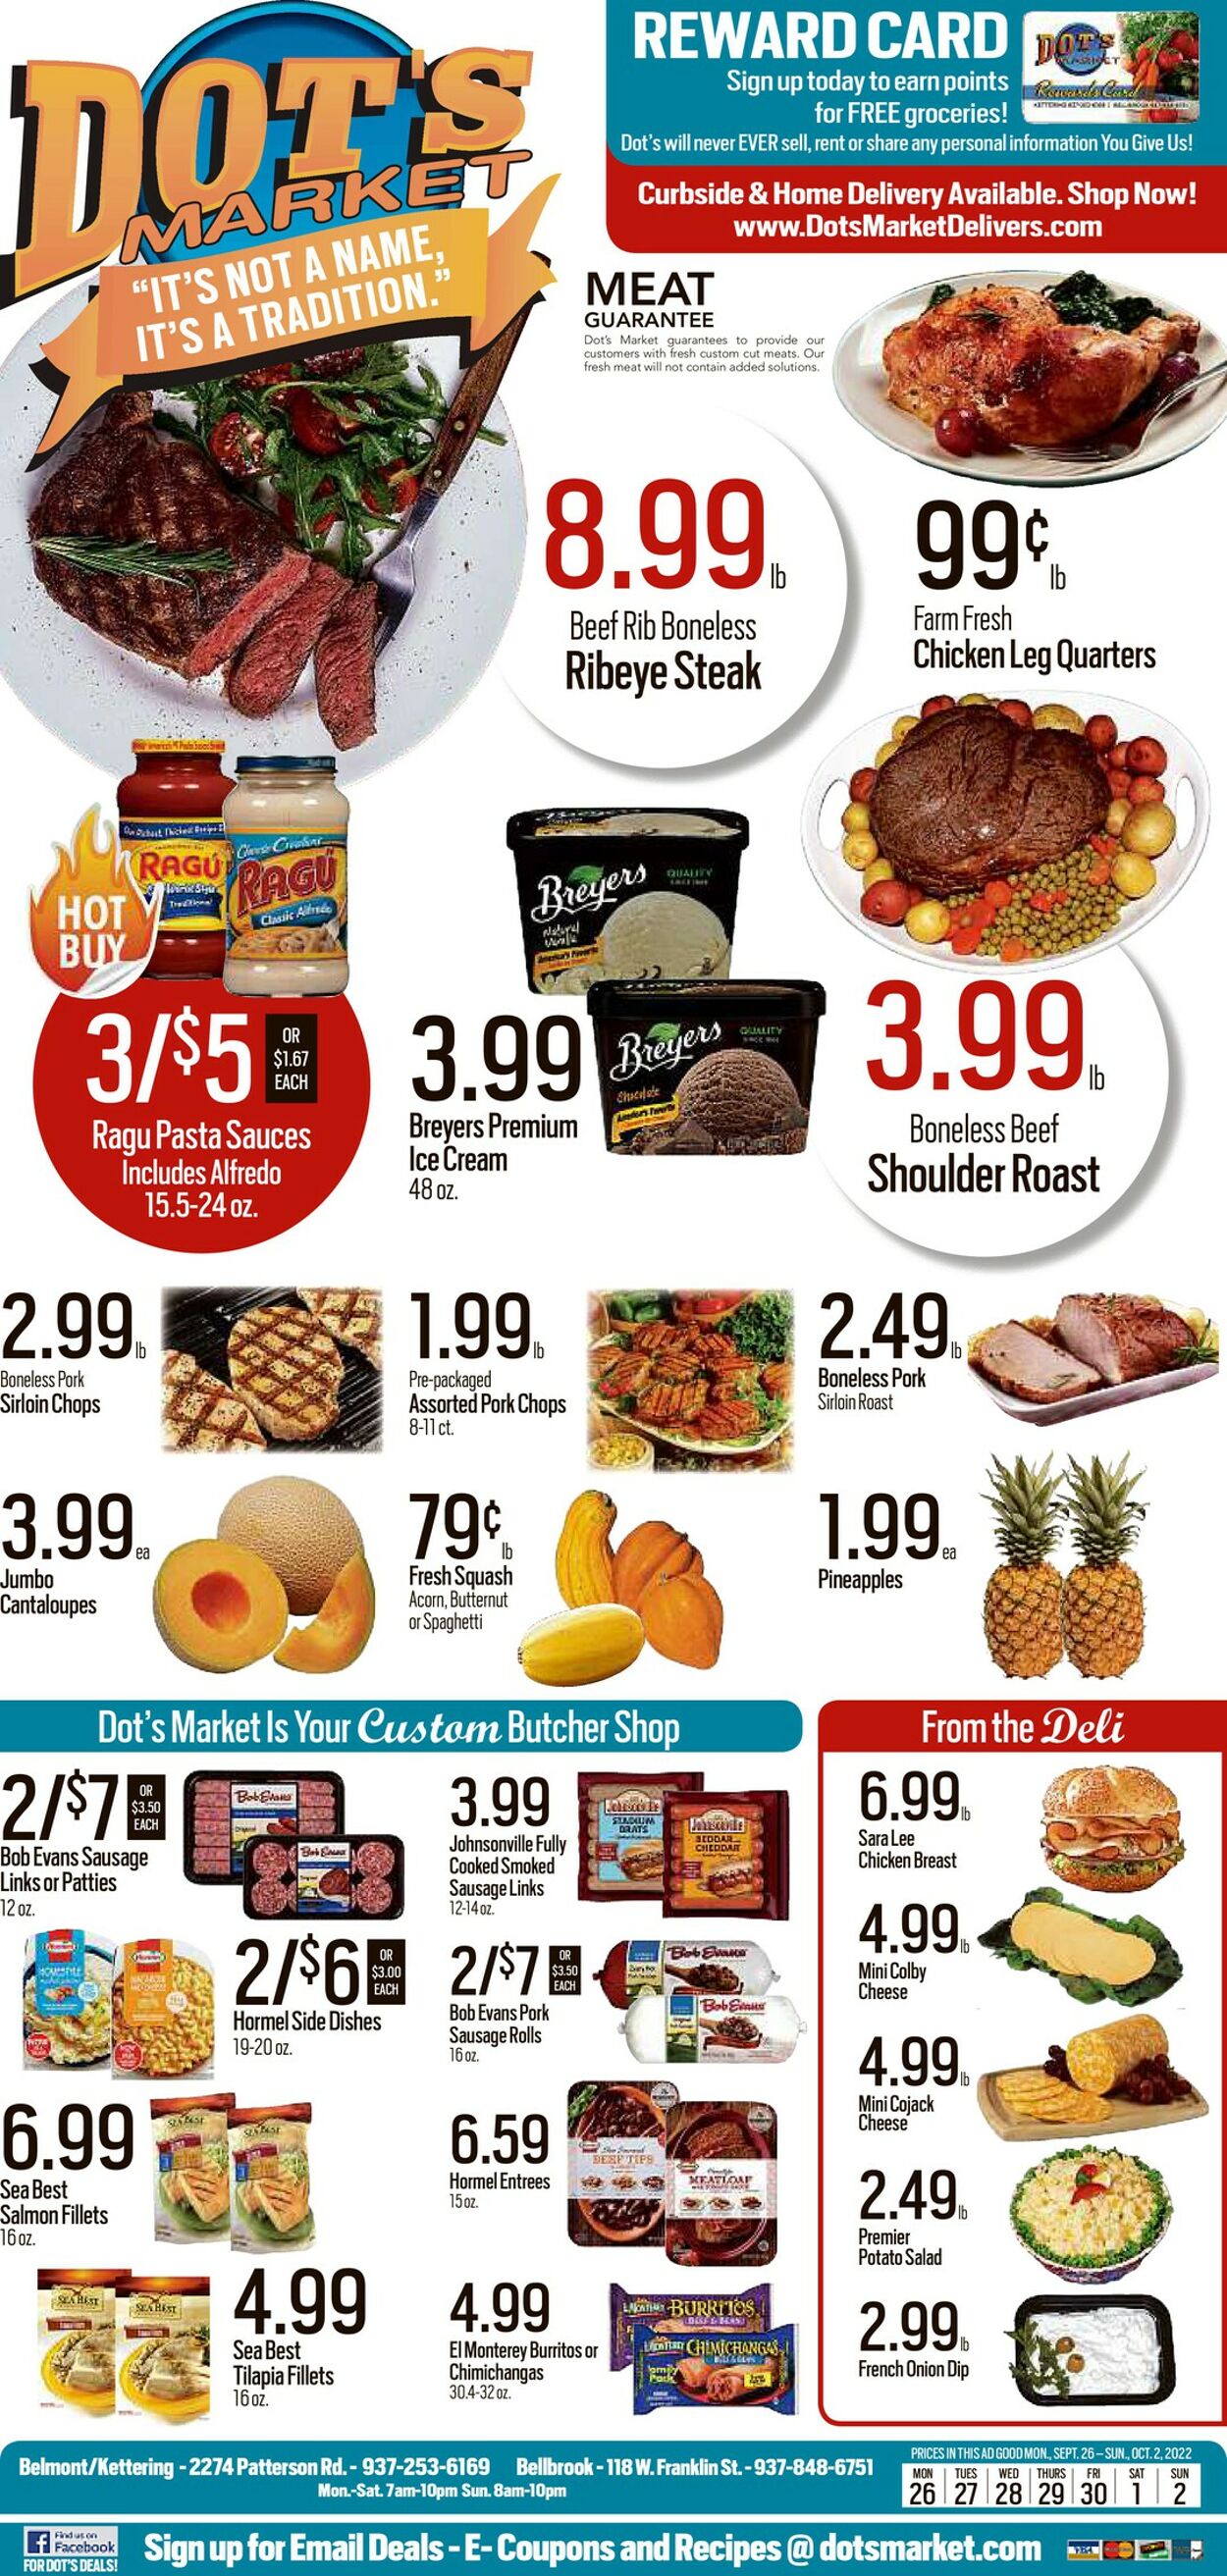 Dot's Market Promotional weekly ads